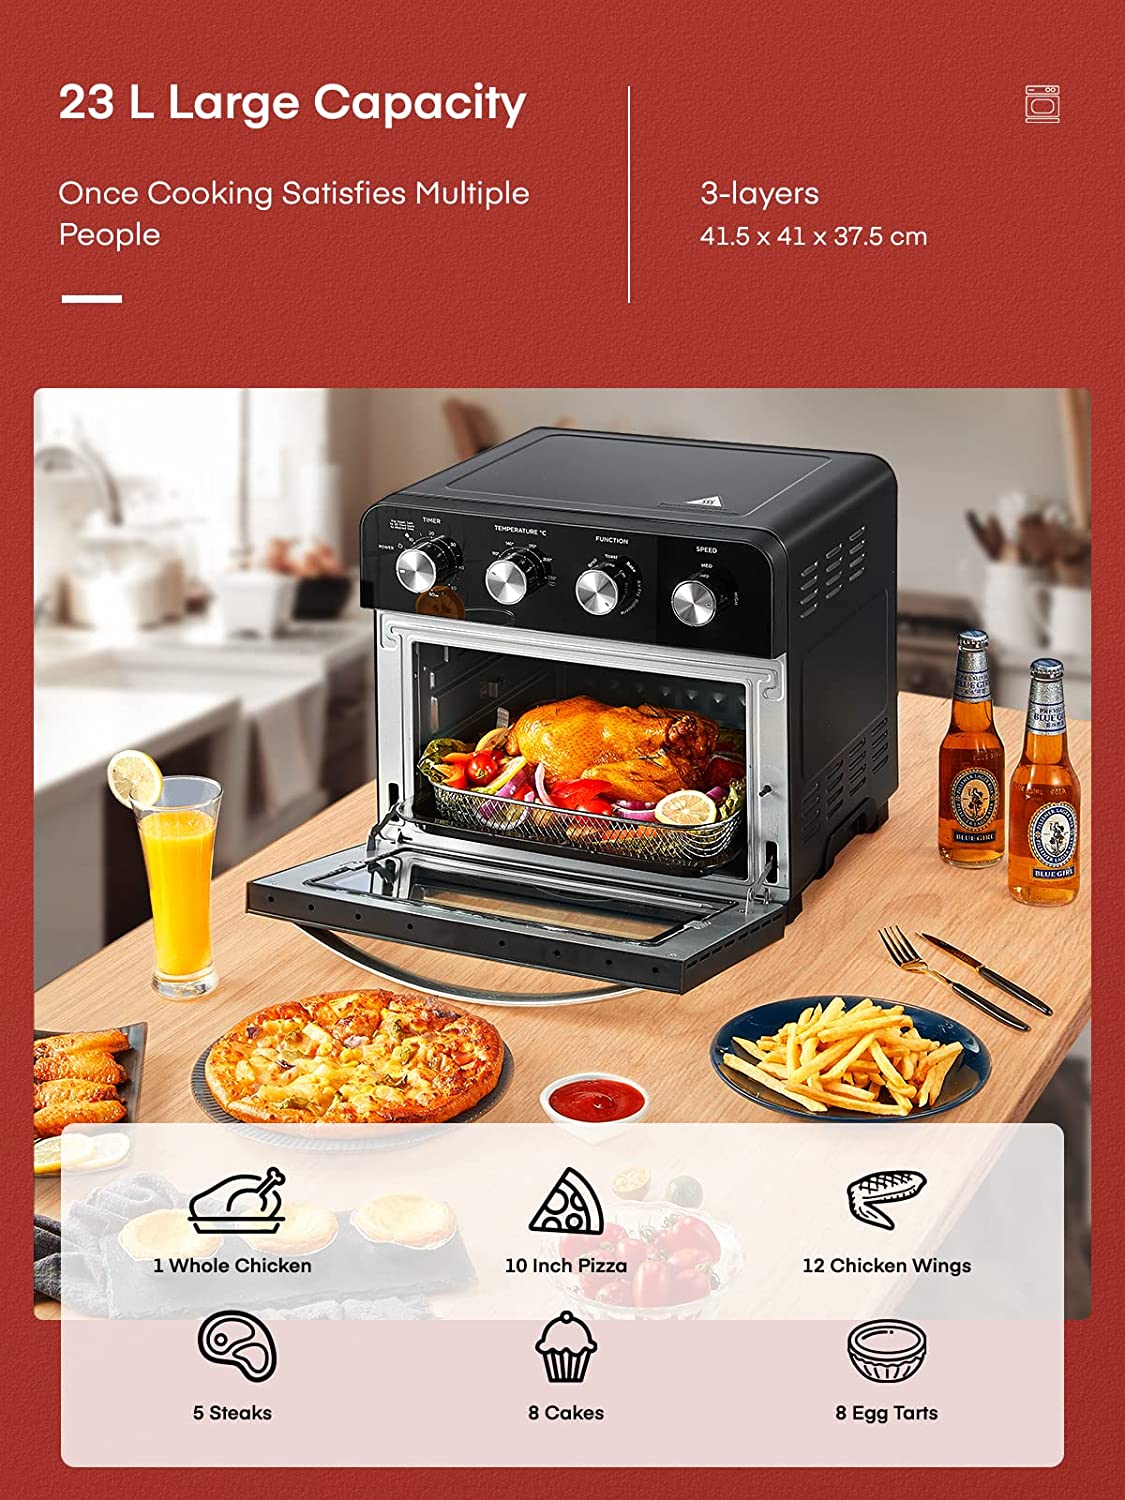 FOHERE Air Fryer Oven Combo, 6 Slice 24 QT Multi-function